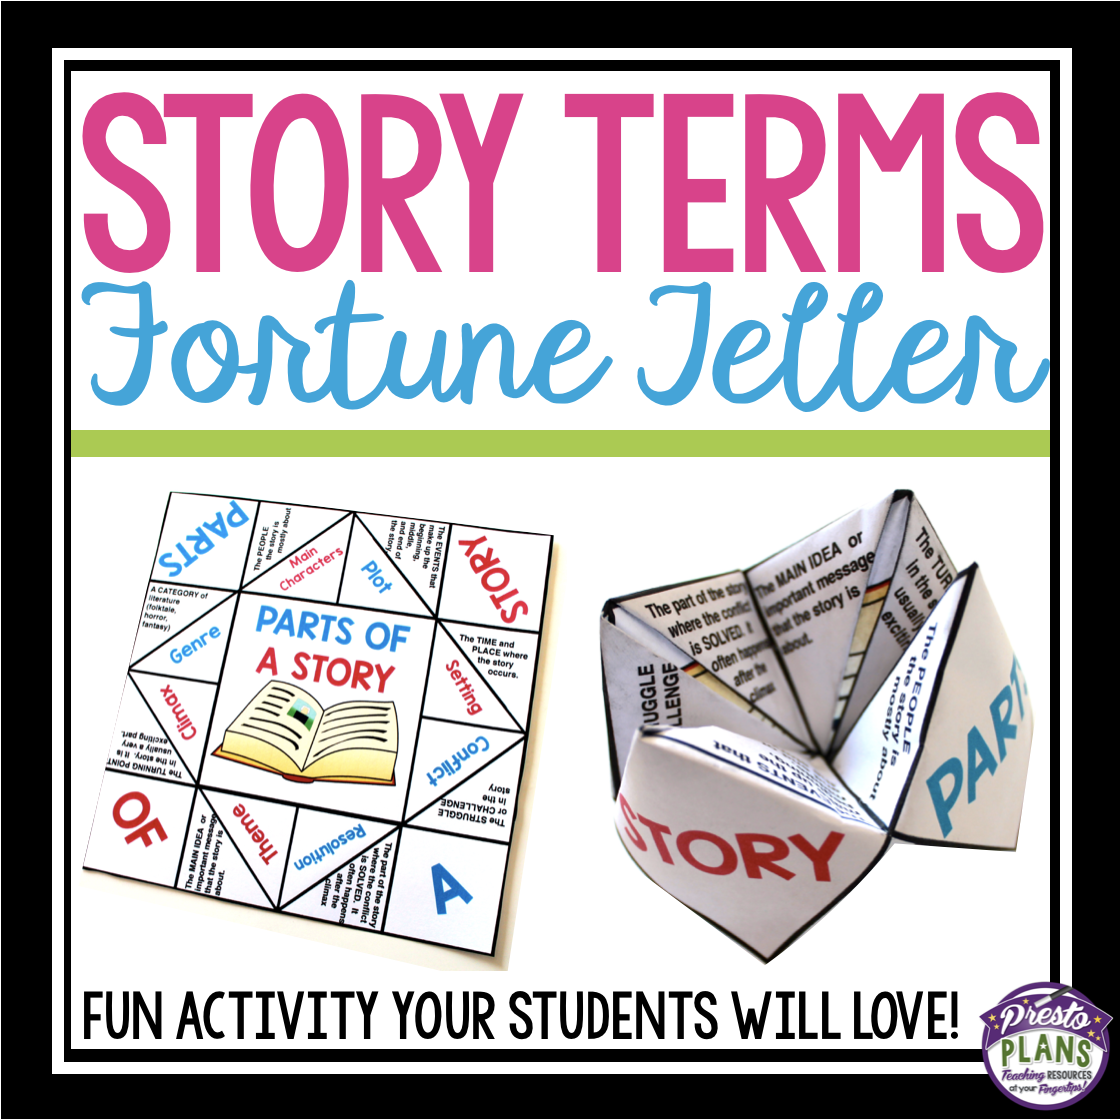 story terms fortune teller